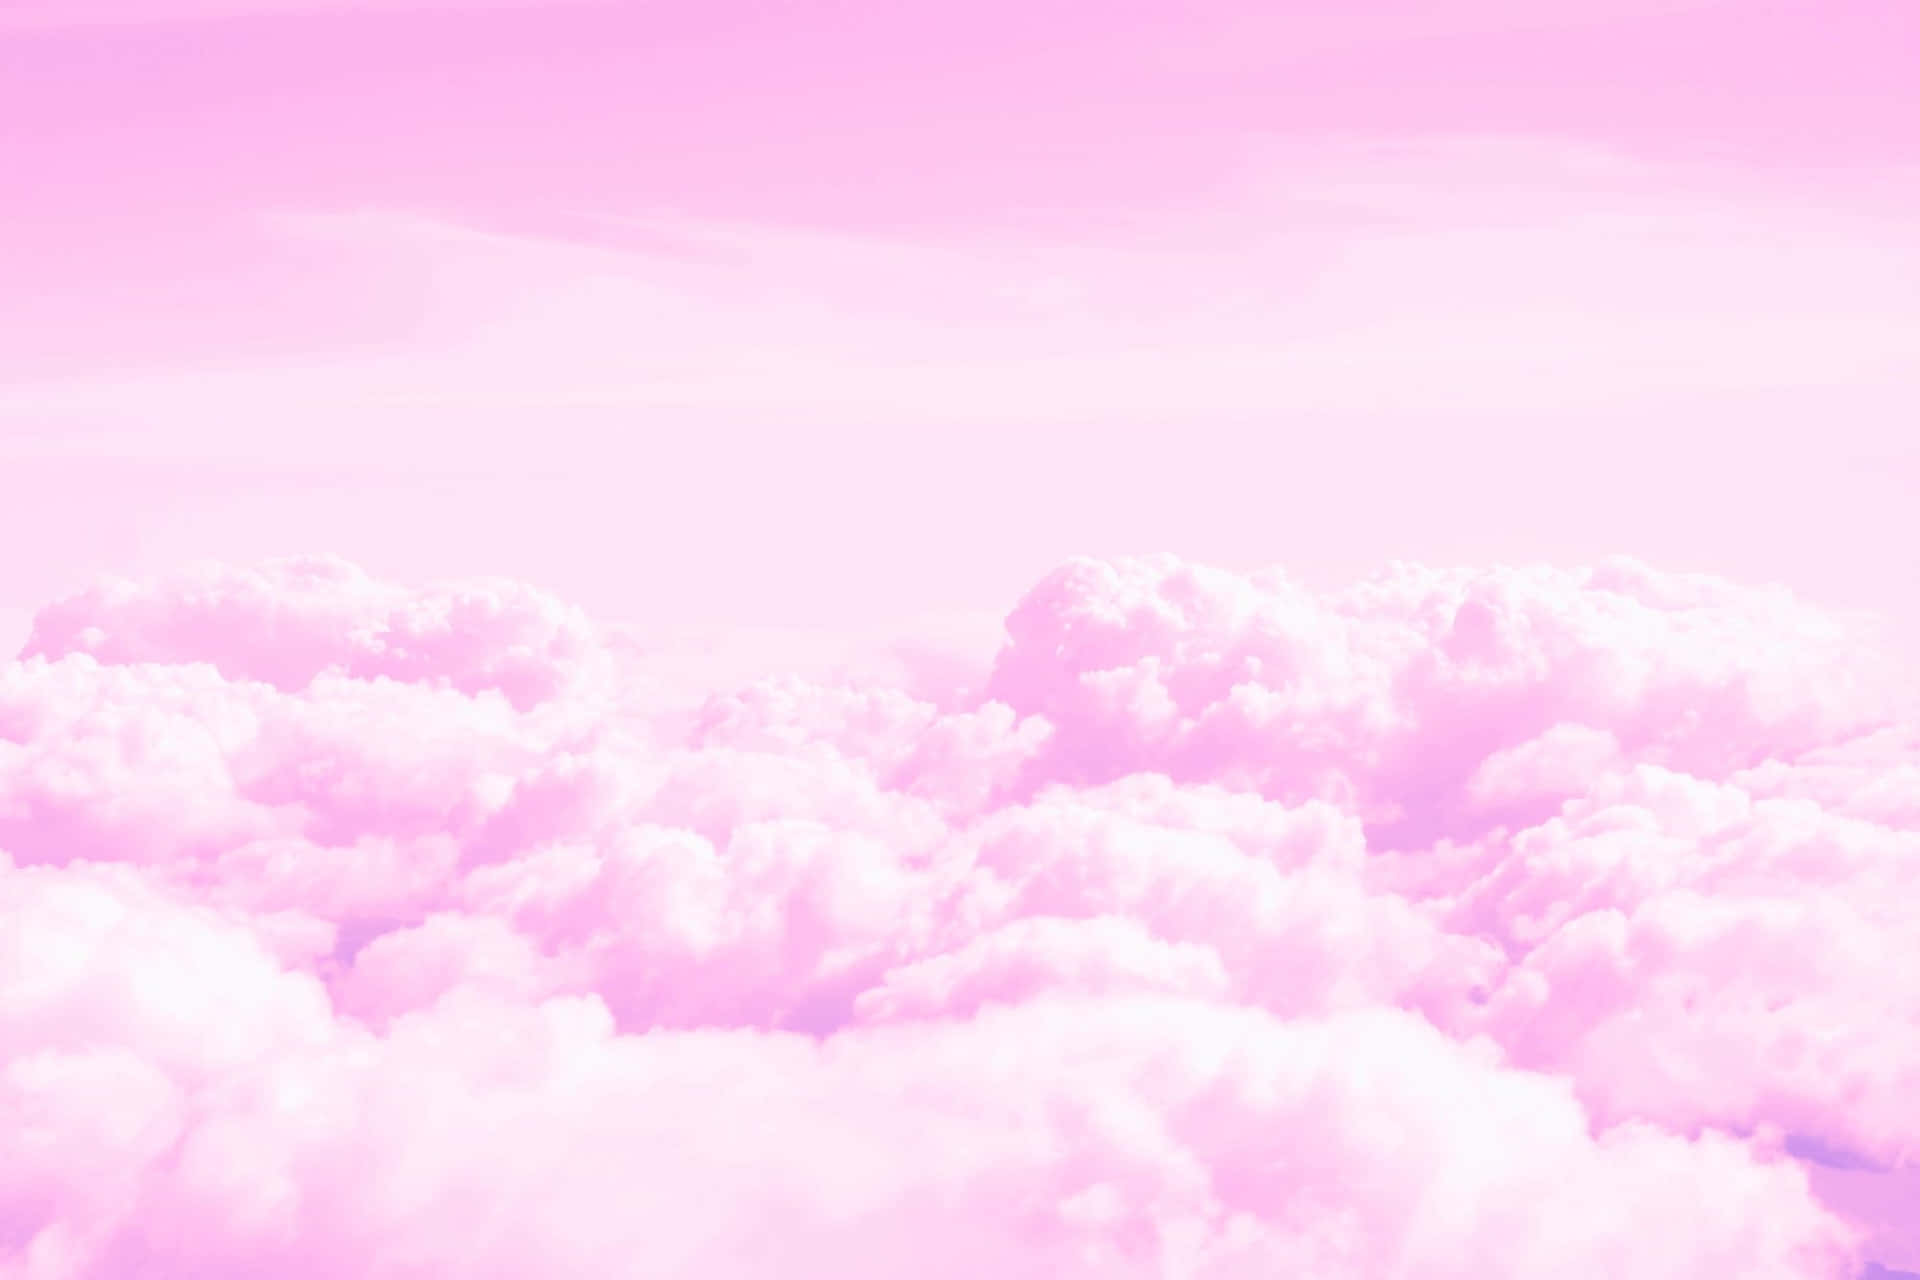 Ethereal beauty above the clouds